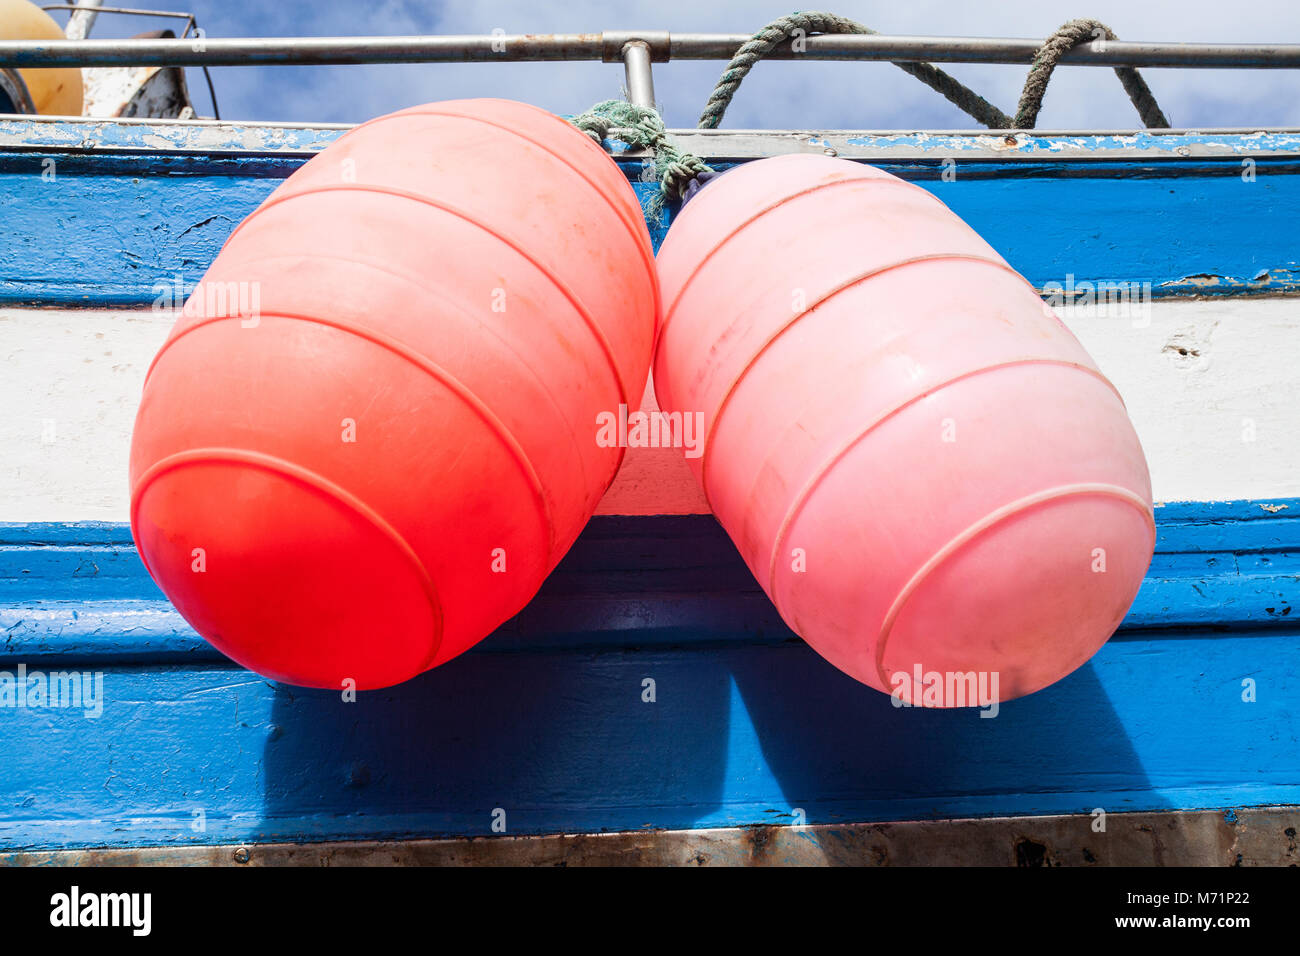 Two bright buoys hanging from the side of a fishing boat on the island of Lanzarote, Spain Stock Photo